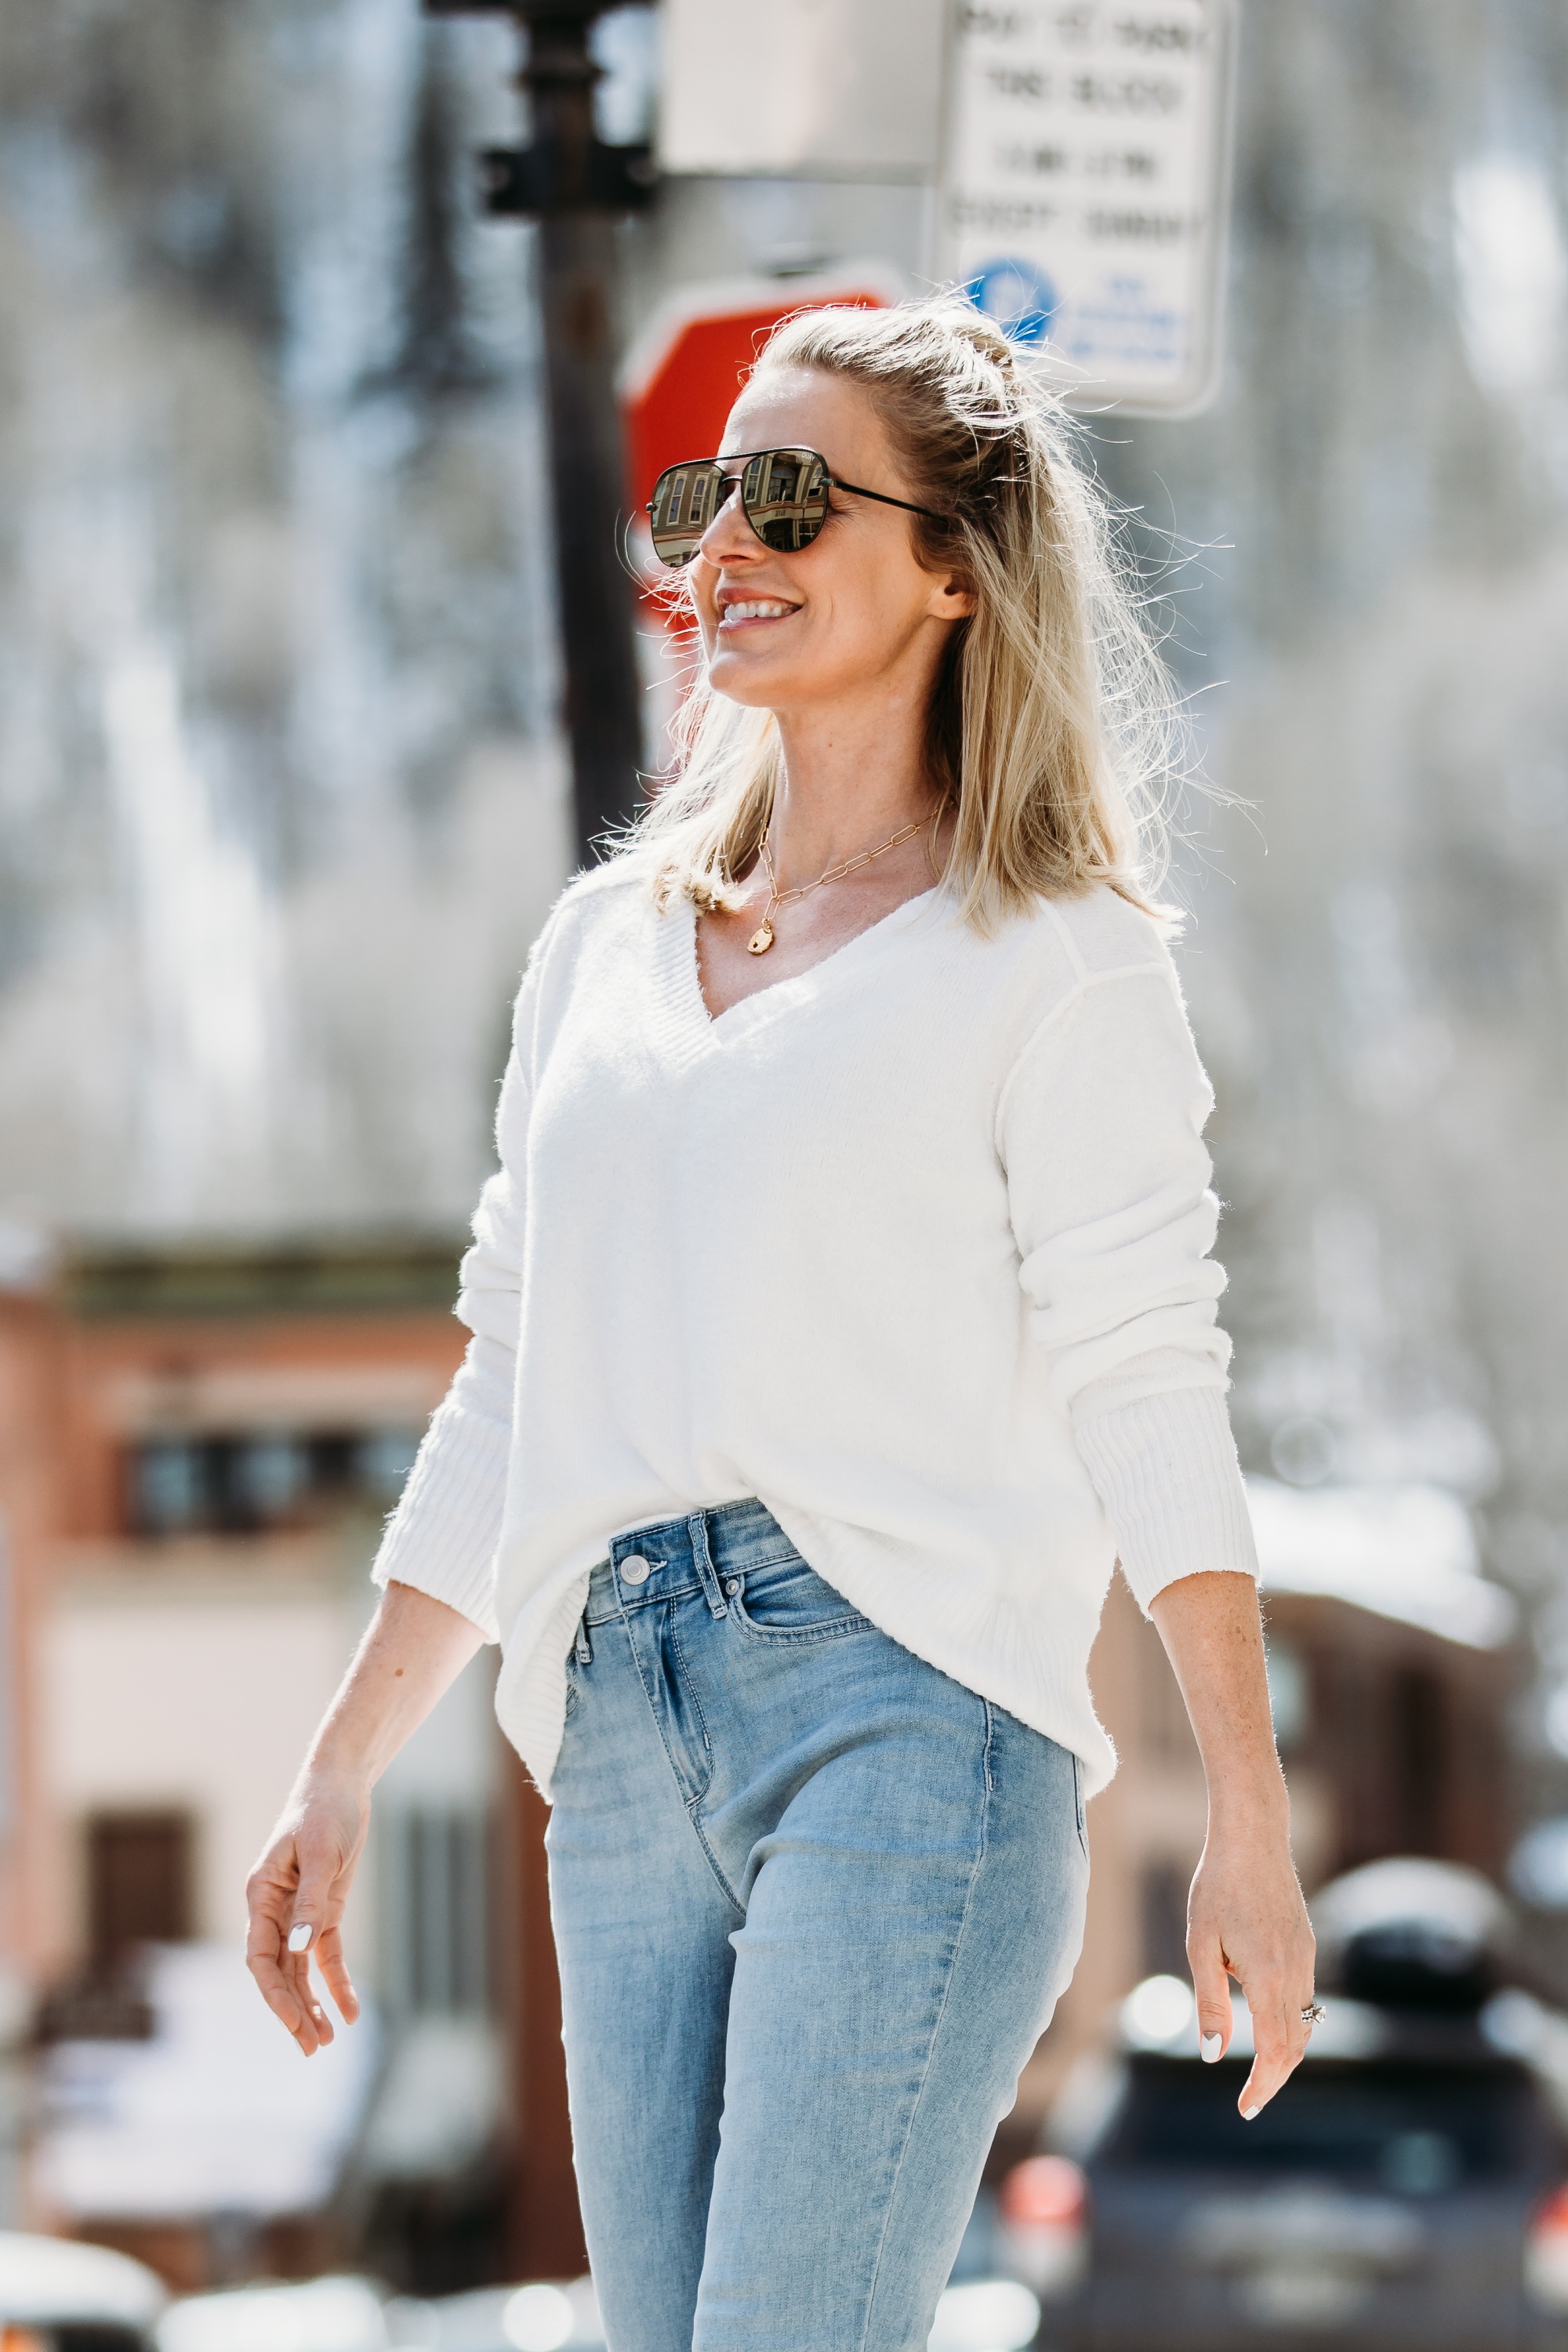 White Sweaters, Fashion blogger Erin Busbee of BusbeeStyle.com wearing a white v-neck sweater by Scoop, light wash skinny jeans by Sofia Vergara, brown suede booties, and green mirrored QUAY sunglasses from Walmart walking in Telluride, Colorado